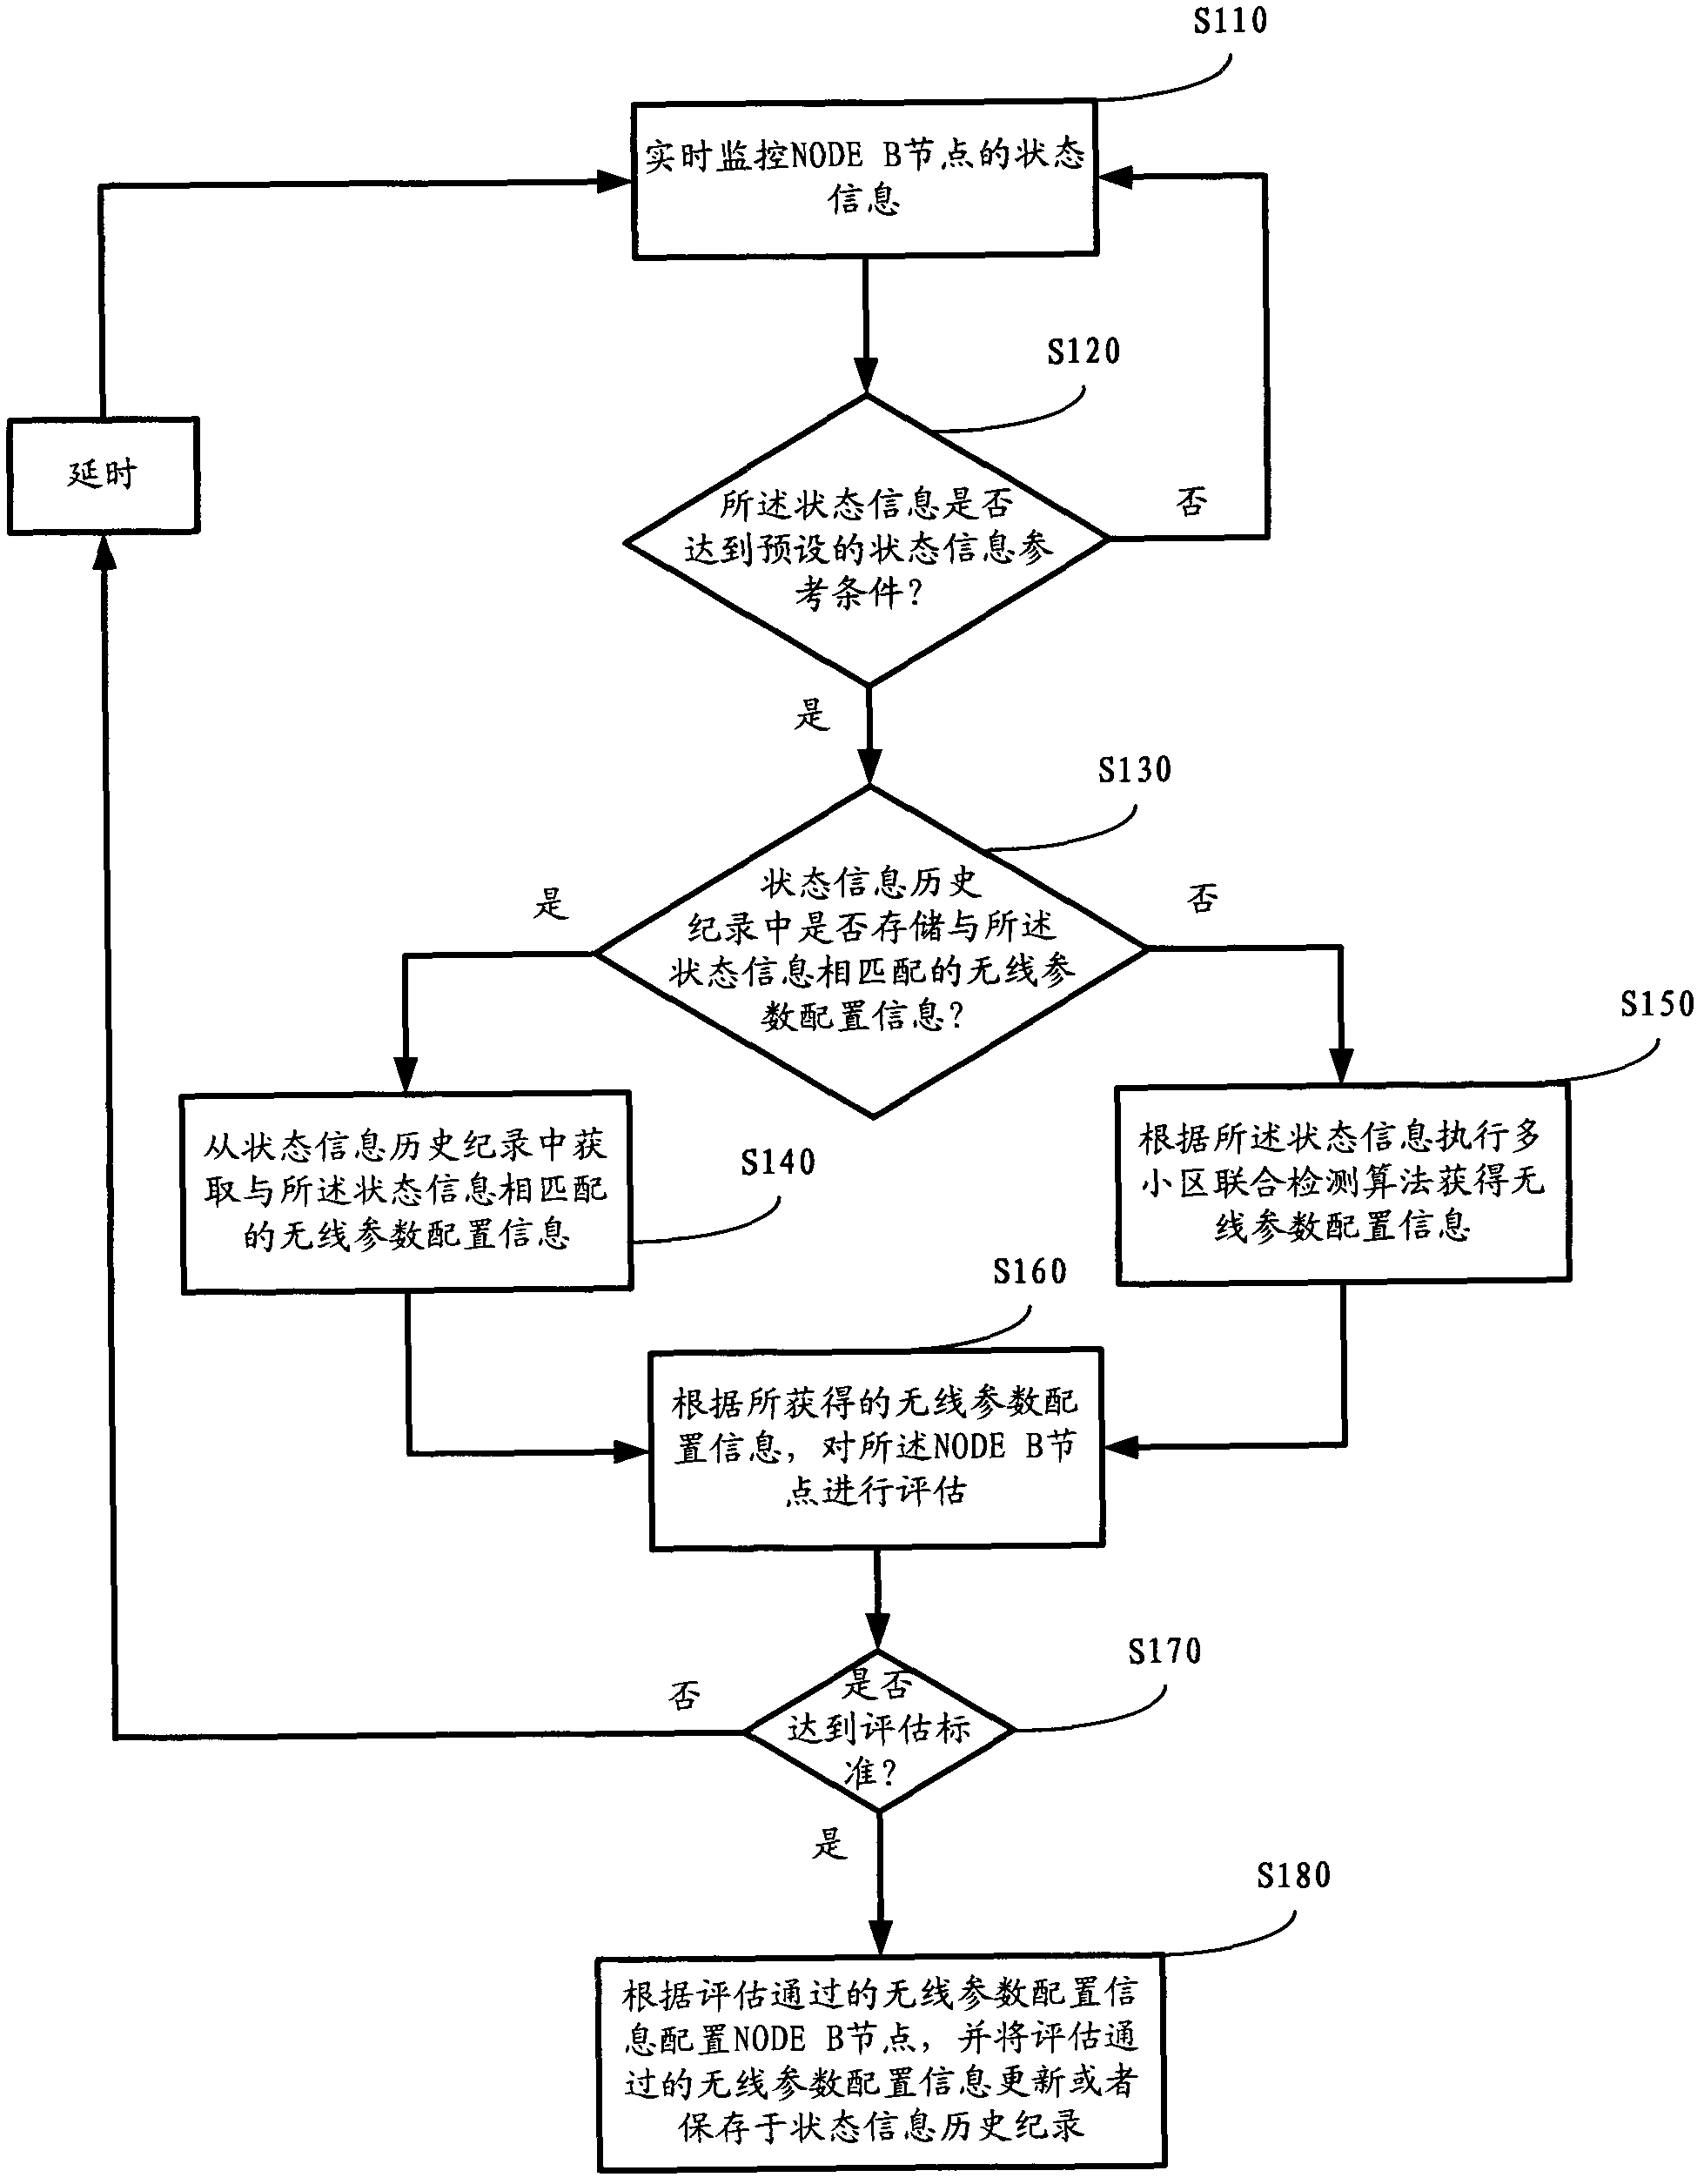 Method for configuring and optimizing carrier frequencies in multiple carrier frequency system and wireless network controller